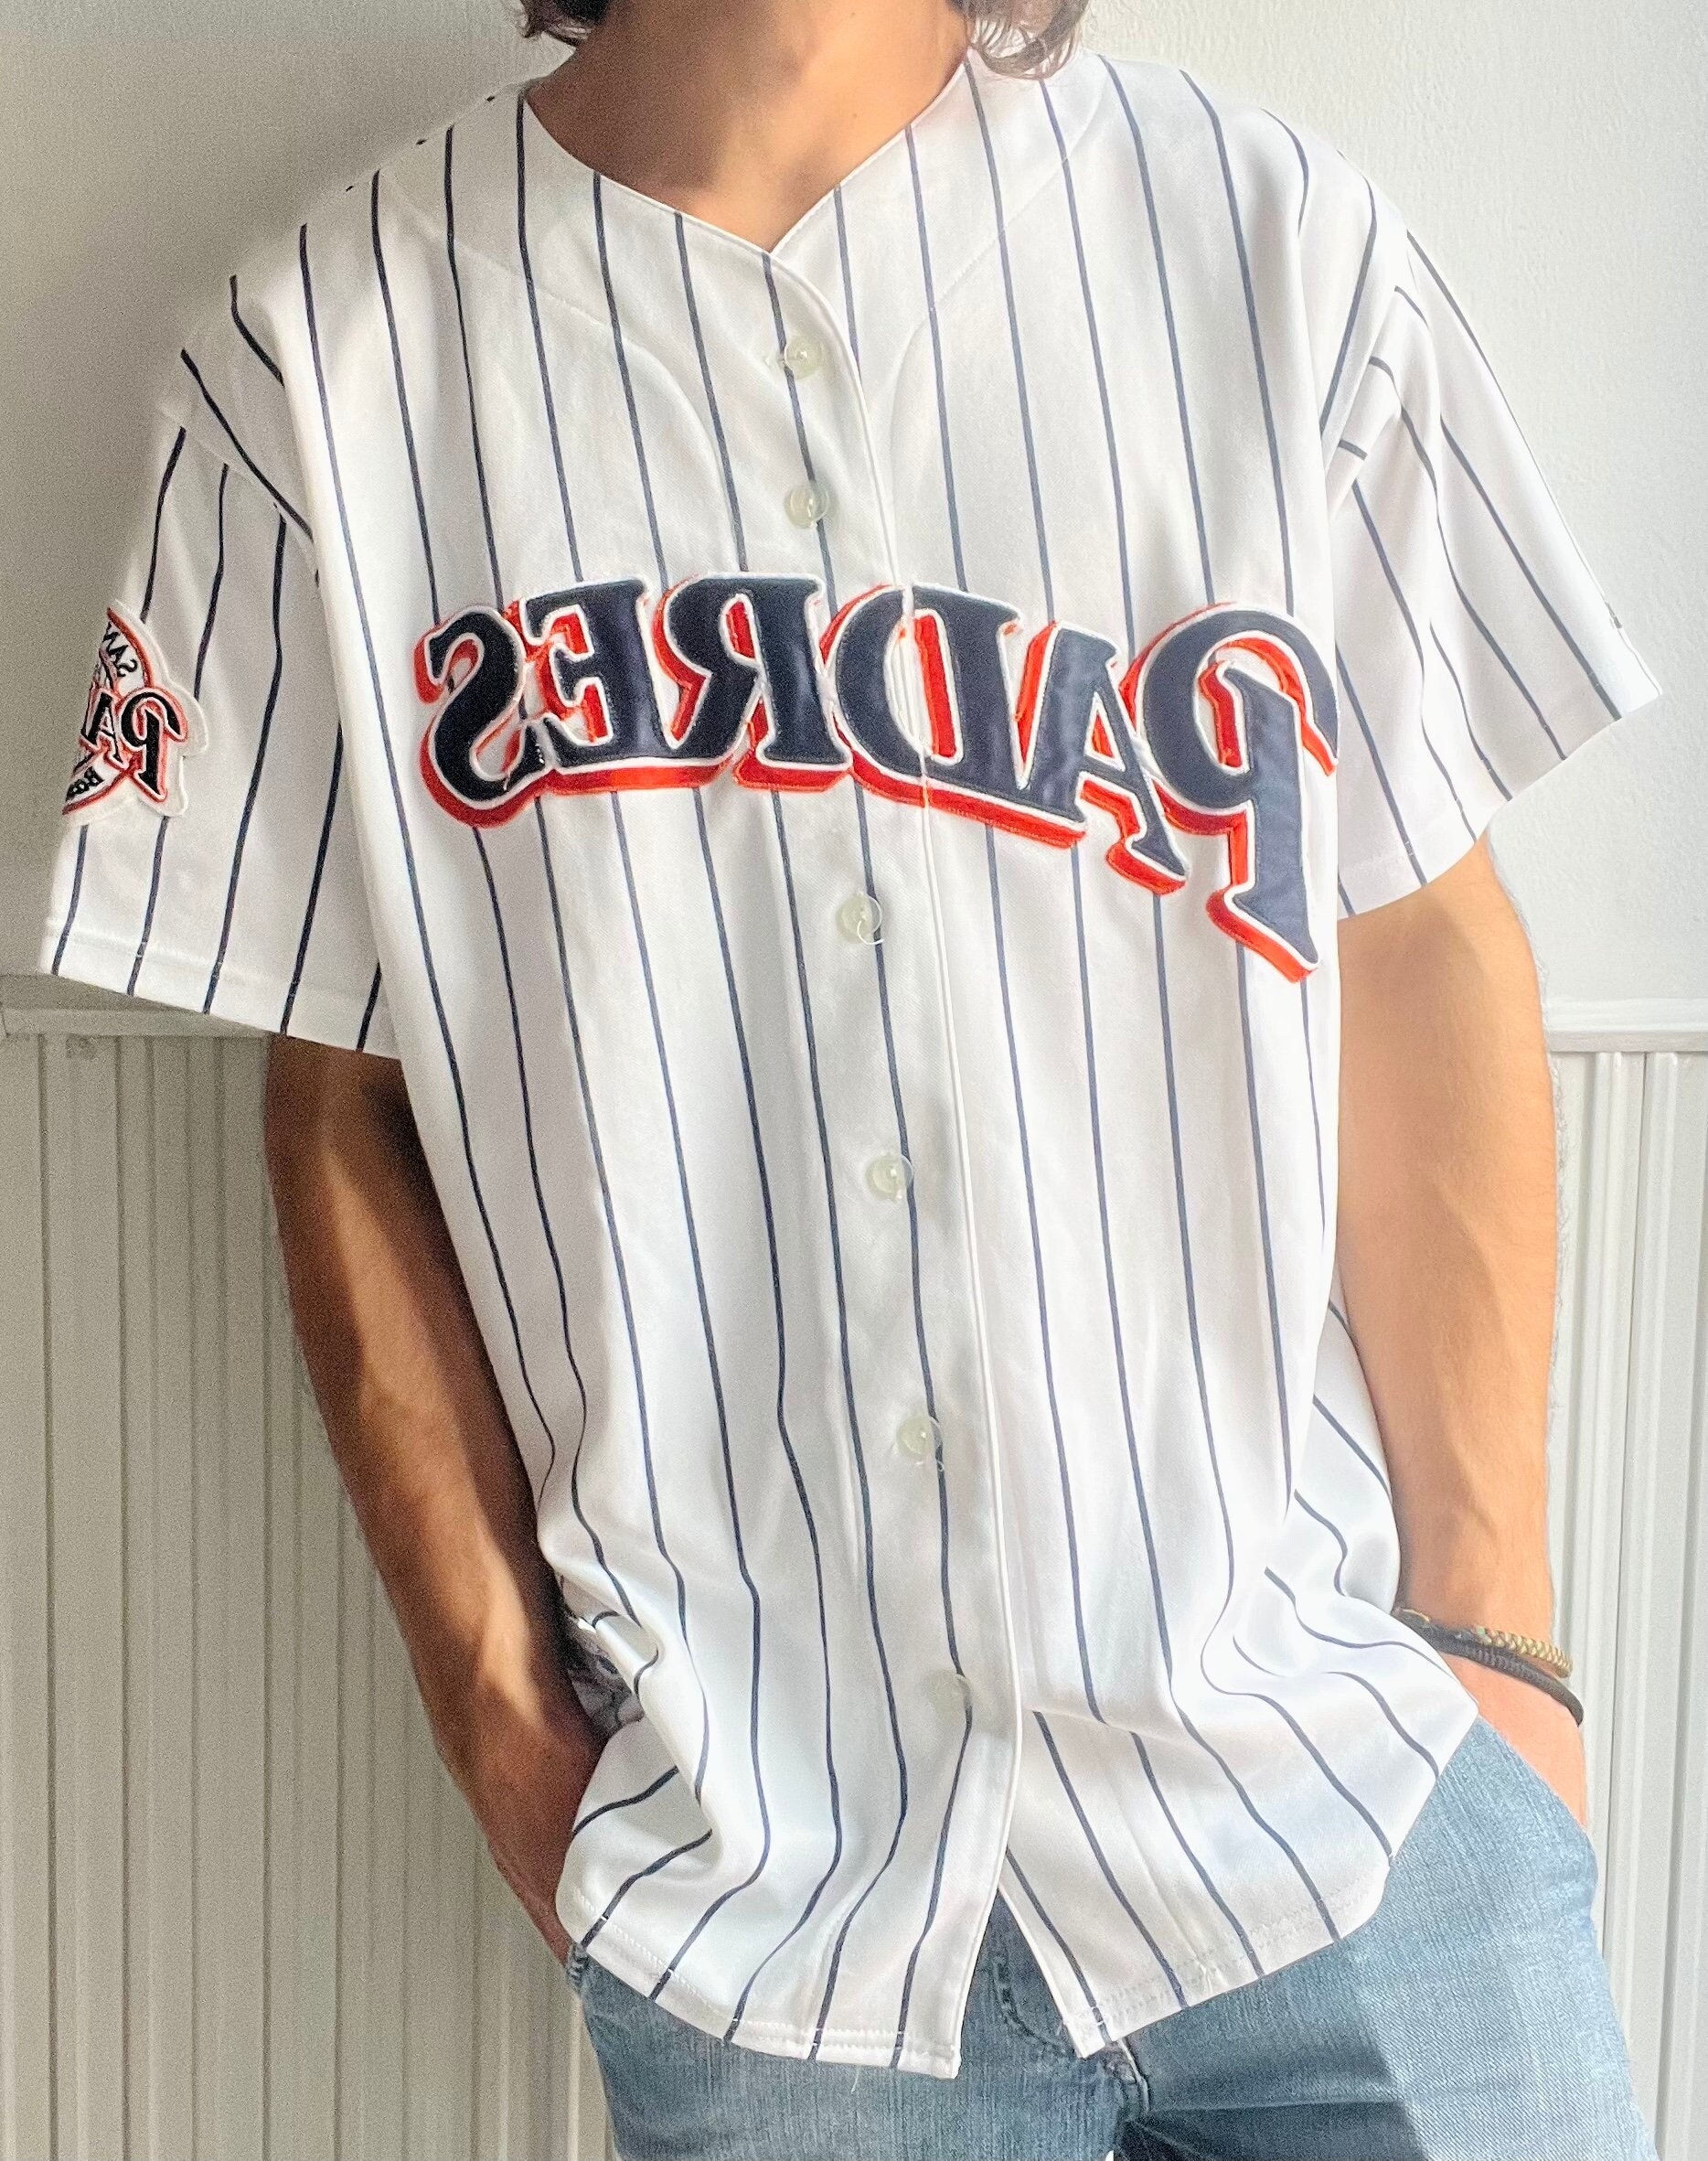 90s Padres Jersey 